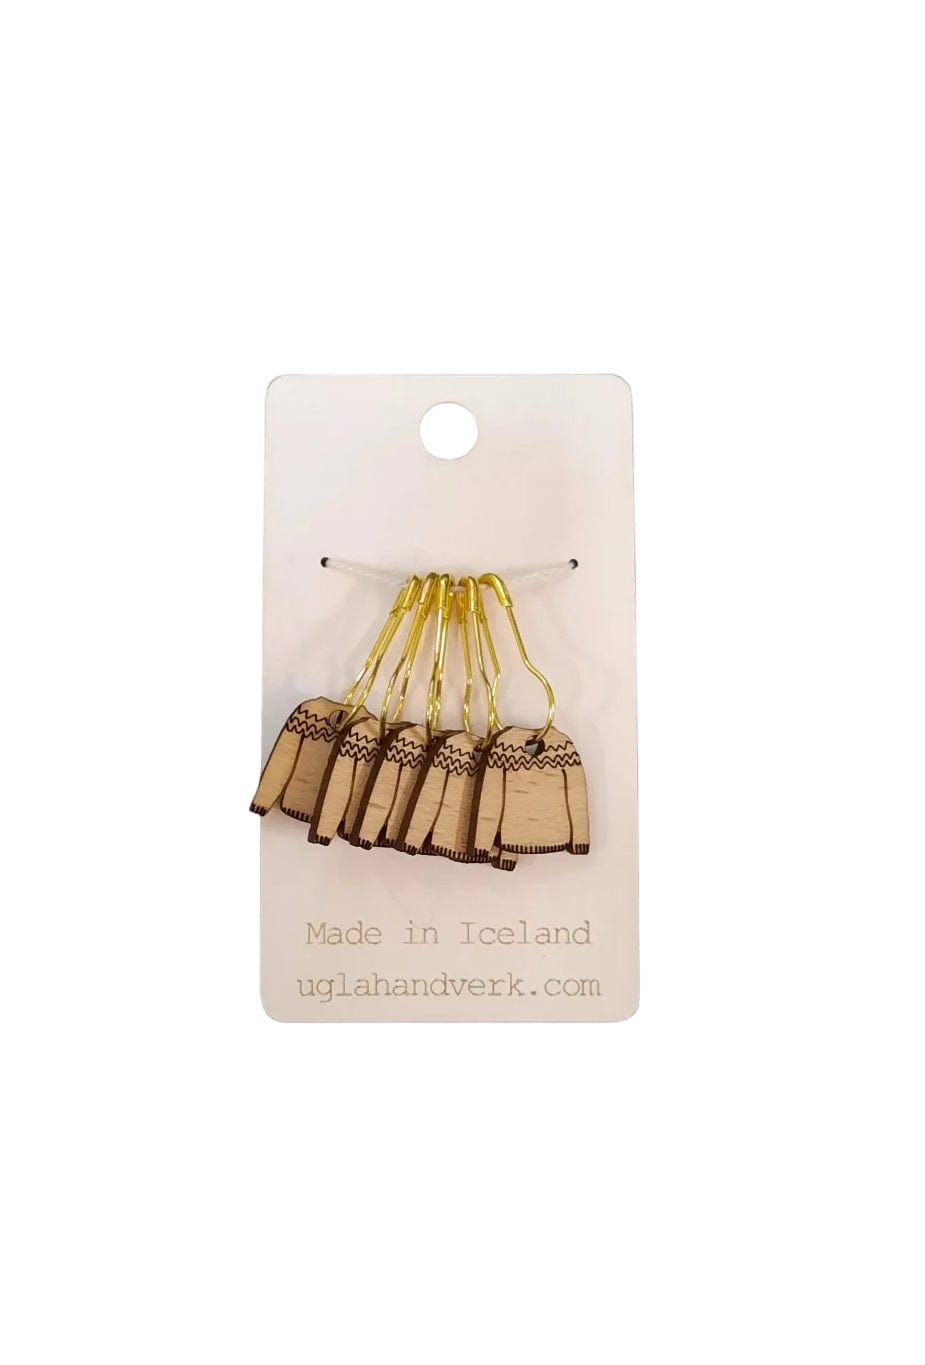 Laser Engraved Wood Stitch Markers set of 5 designed with traditional Icelandic wool sweater. 